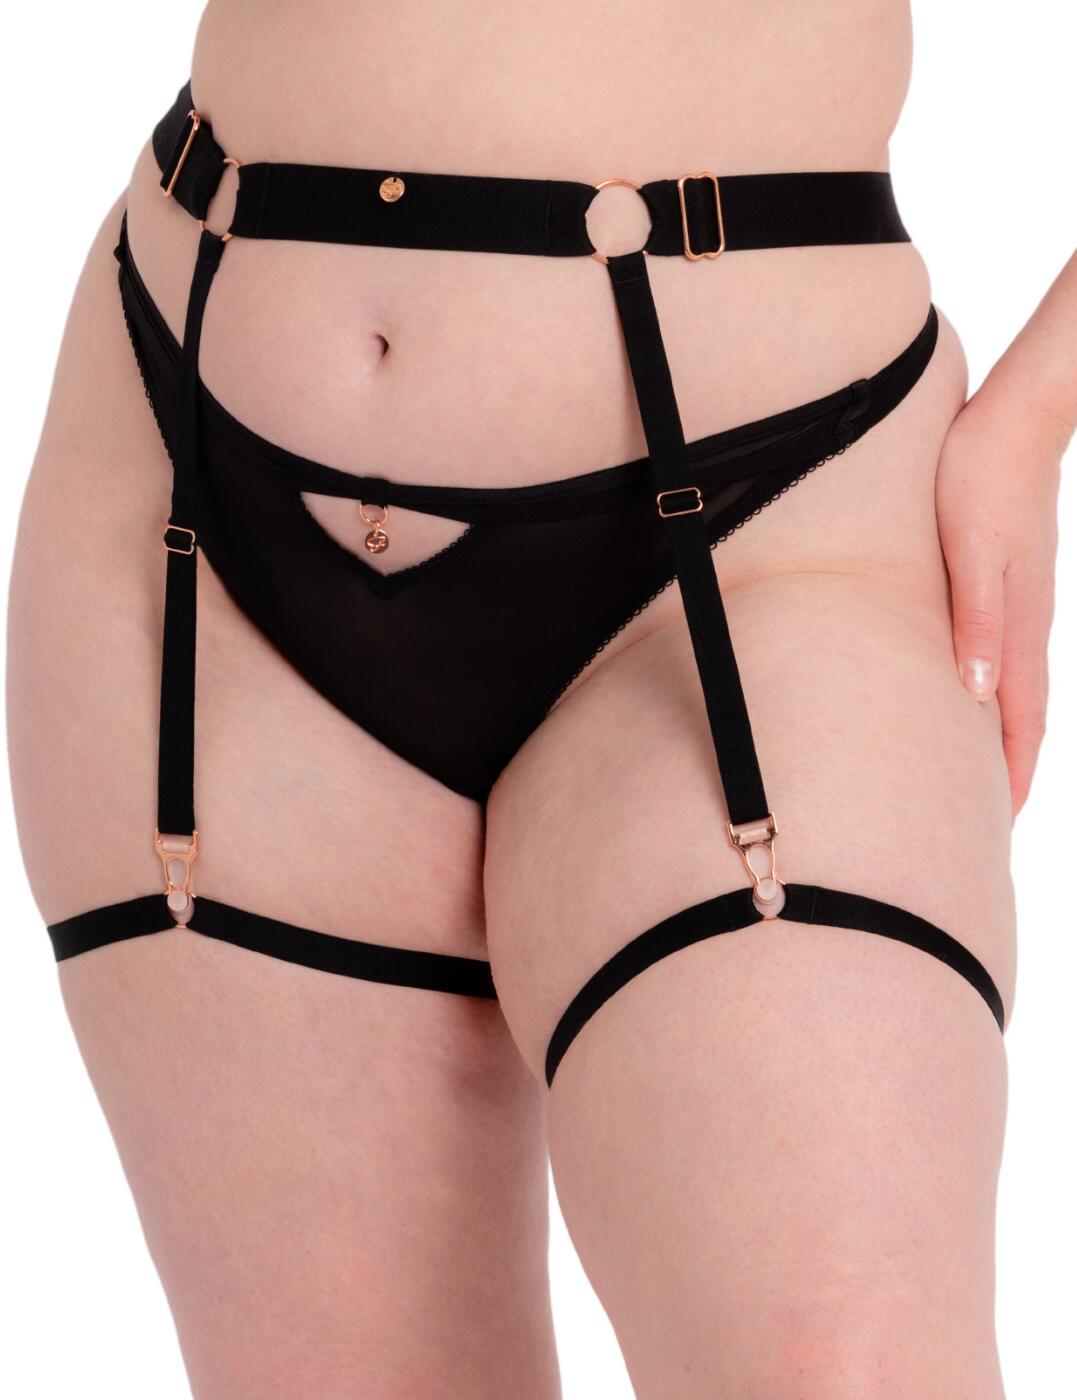 Scantilly by Curvy Kate Rules of Distraction Strap Suspender Black